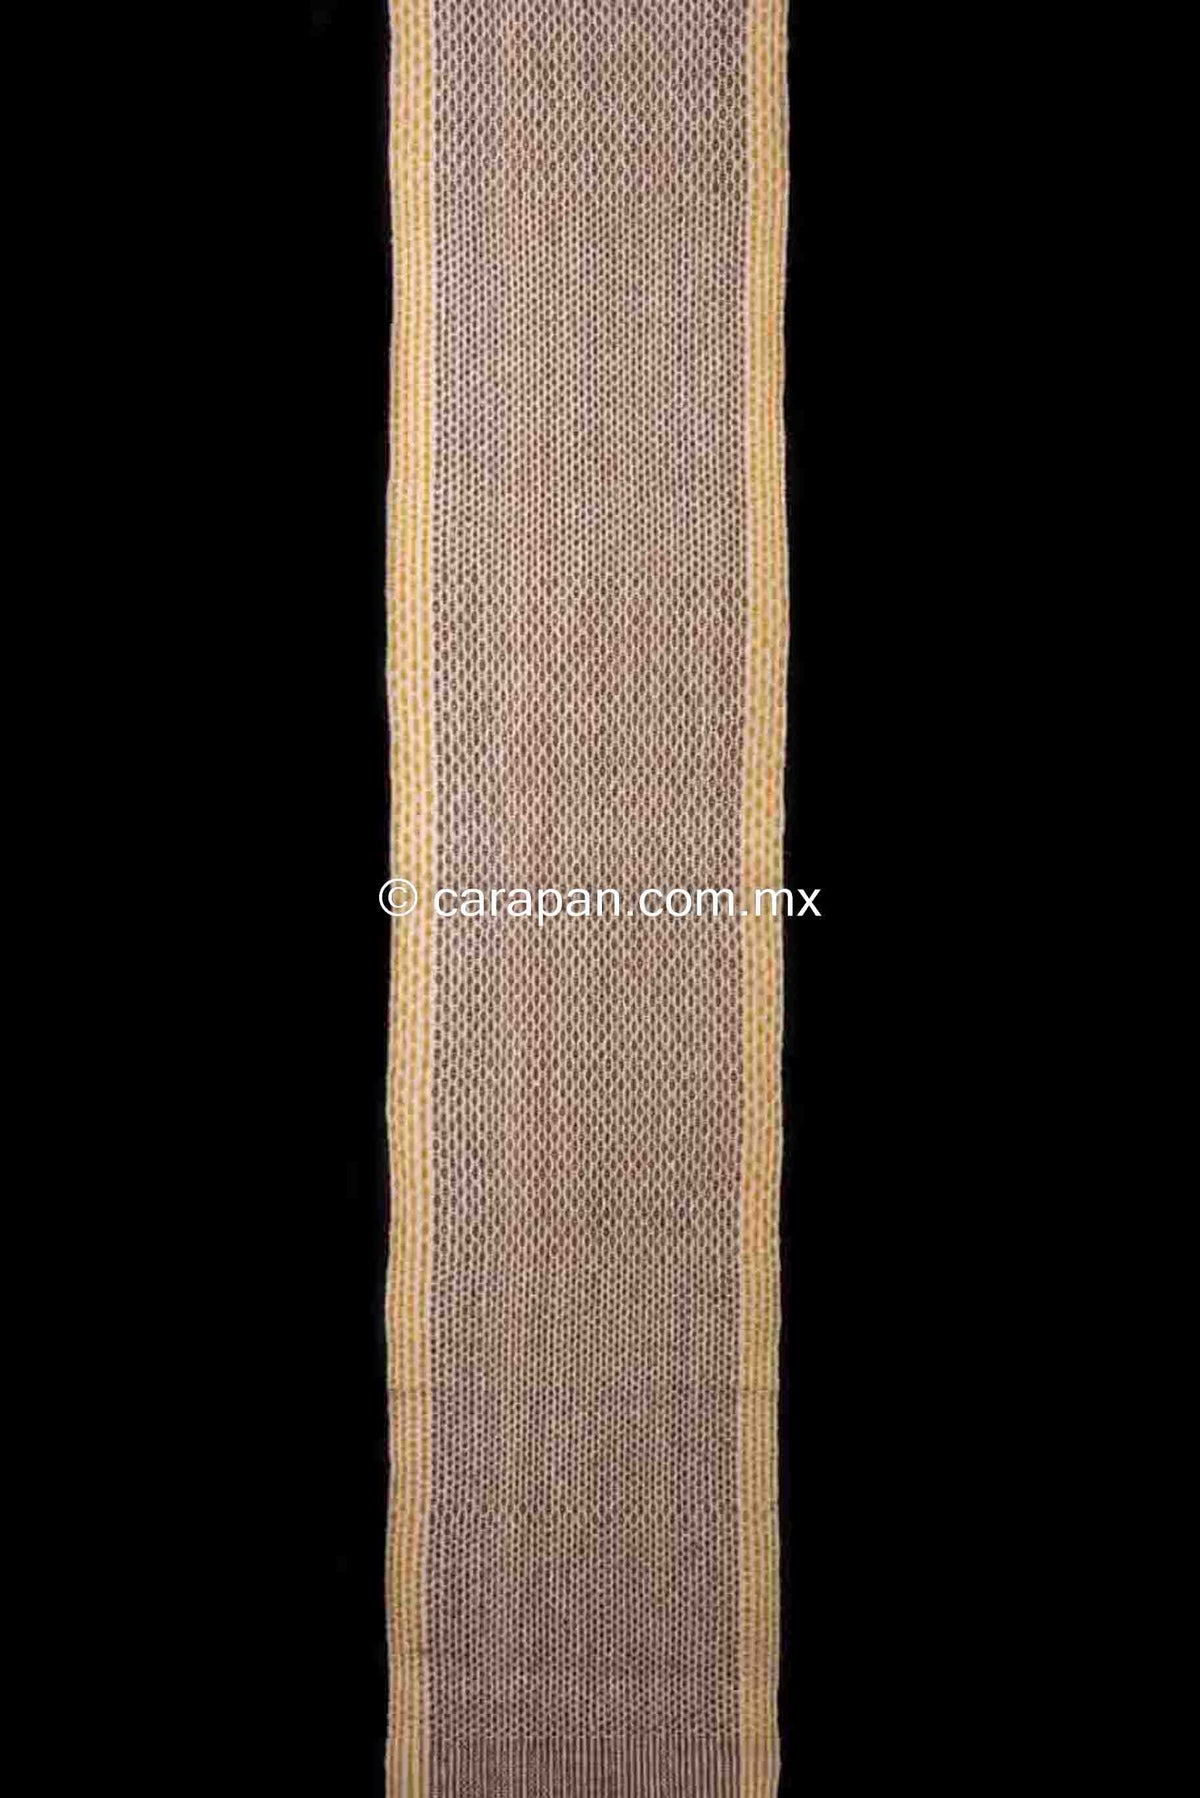 Wool Table Runner with brown diamonds & two yellow stripes on each side